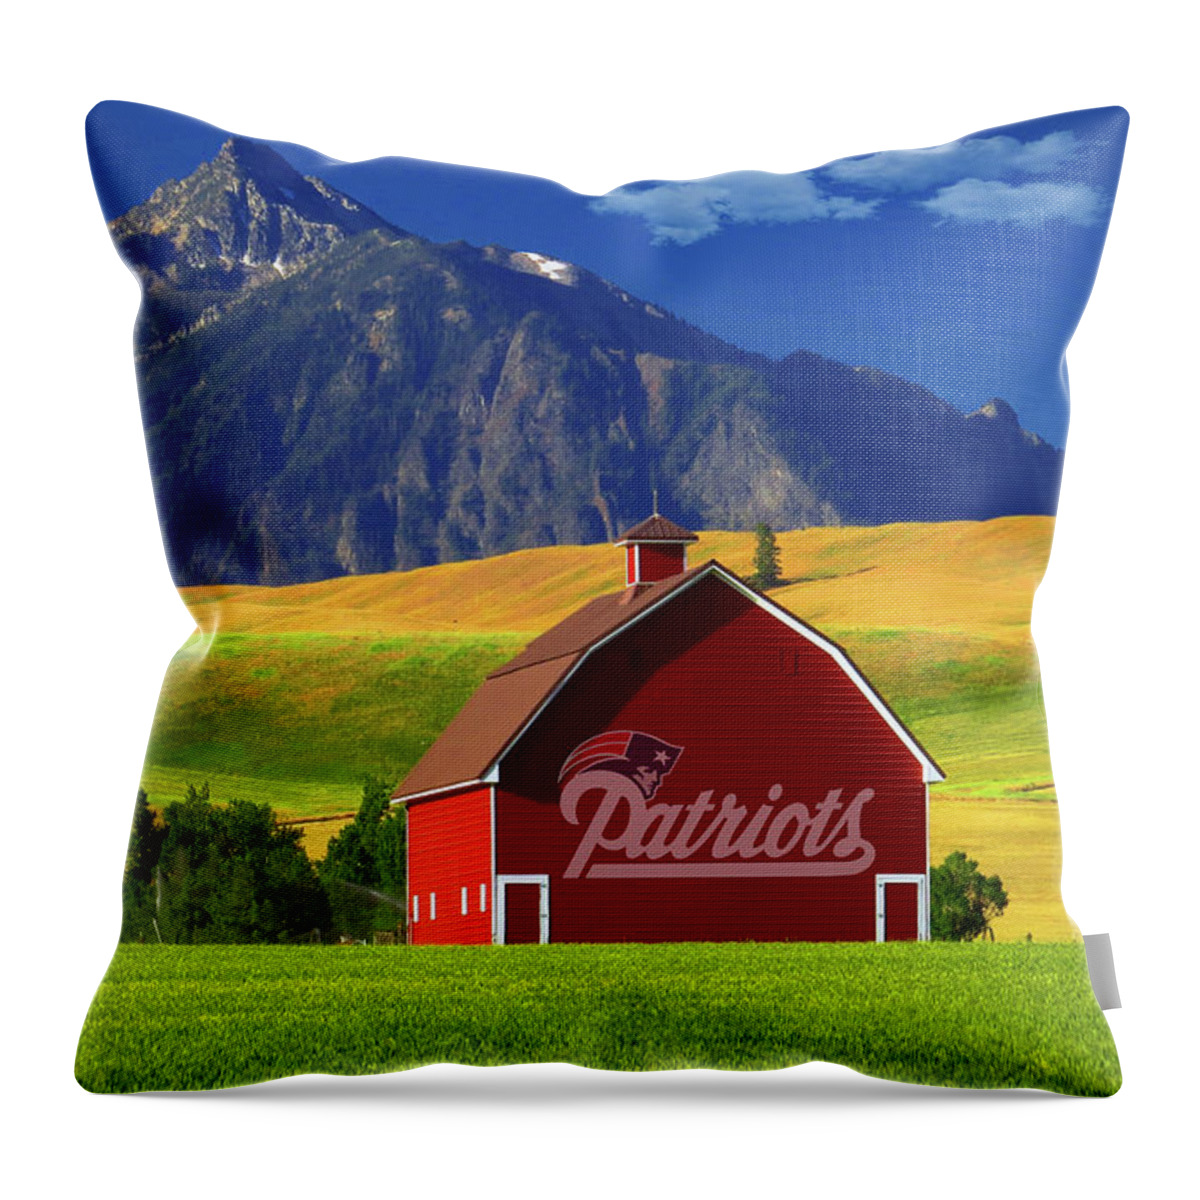 New England Throw Pillow featuring the photograph New England Patriots Barn by Movie Poster Prints